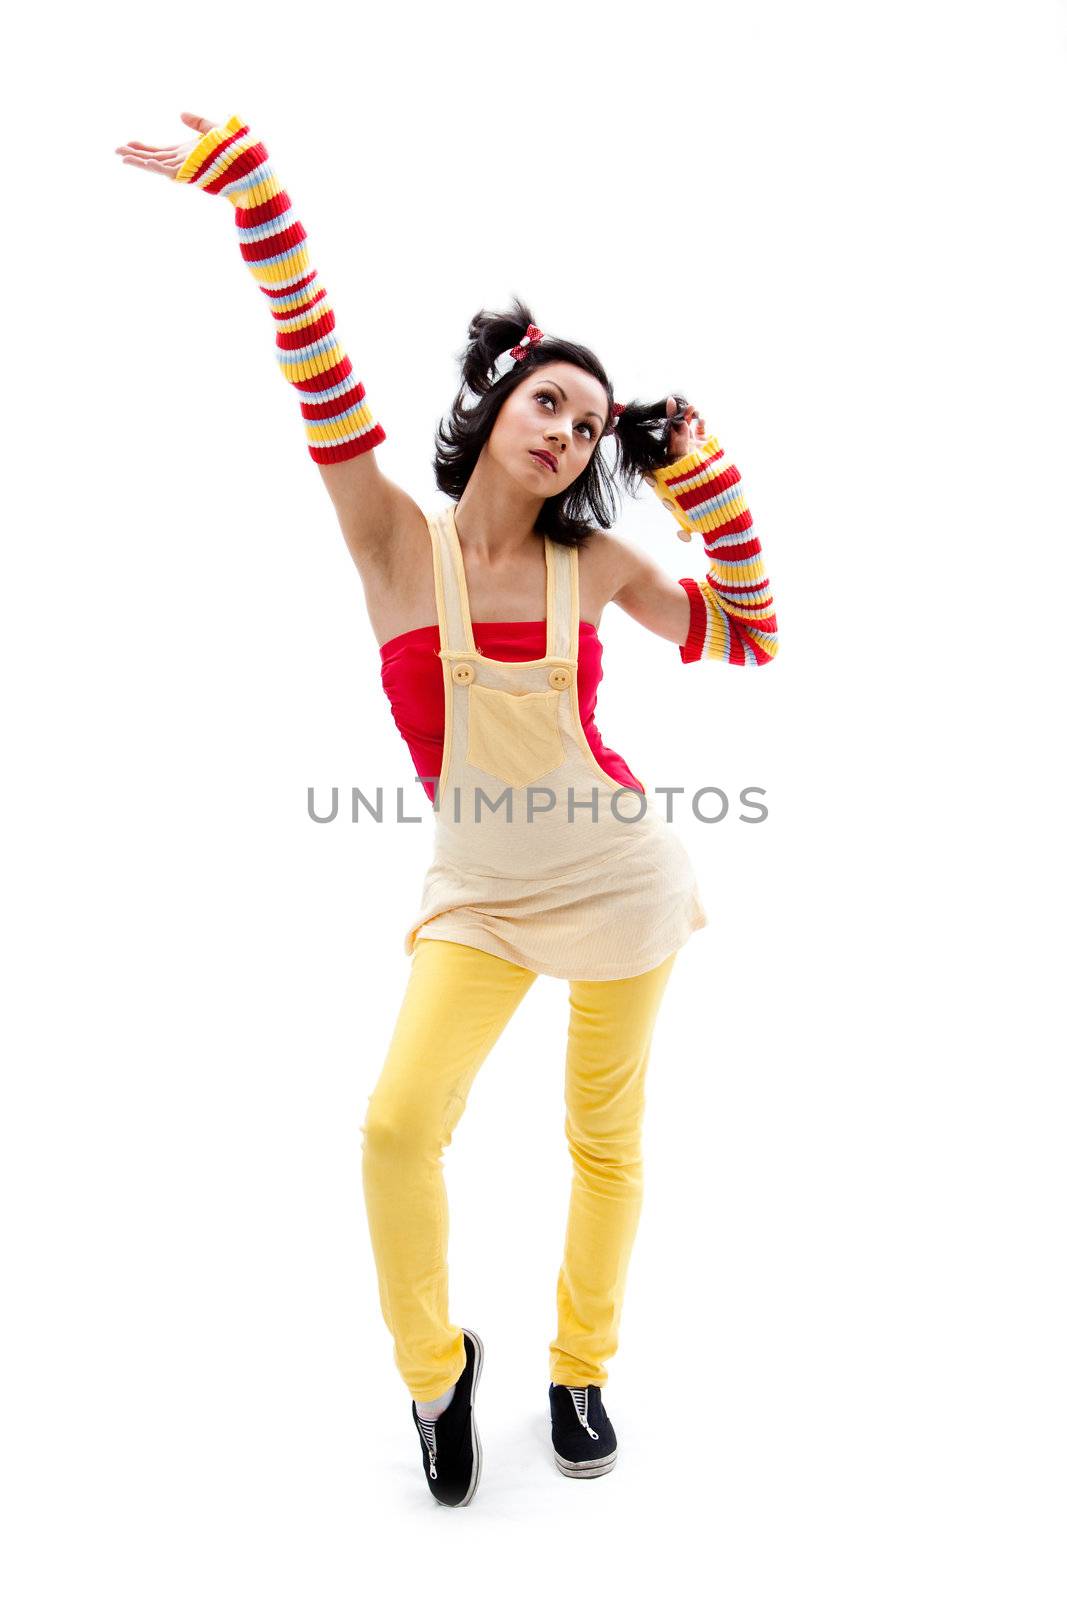 Beautiful fun latina girl with bright colored arm warmers and ponytails with red ribbons in her hair standing with hand in air, isolated